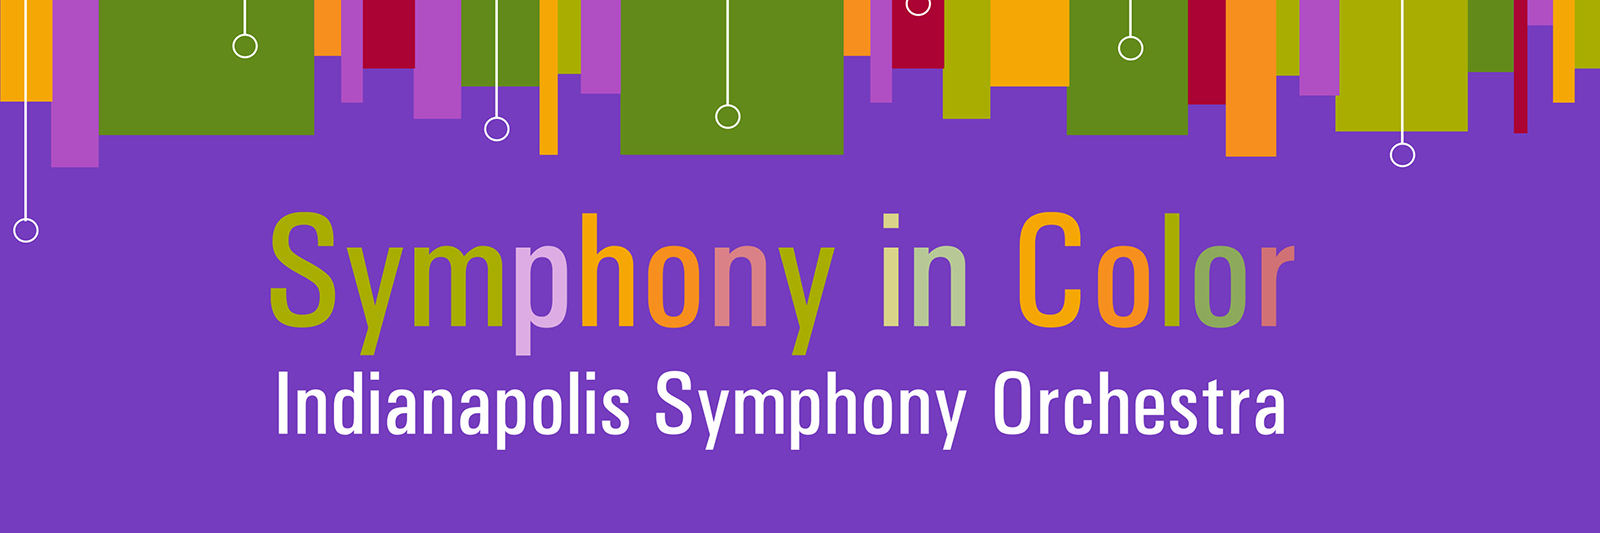 Symphony in Color